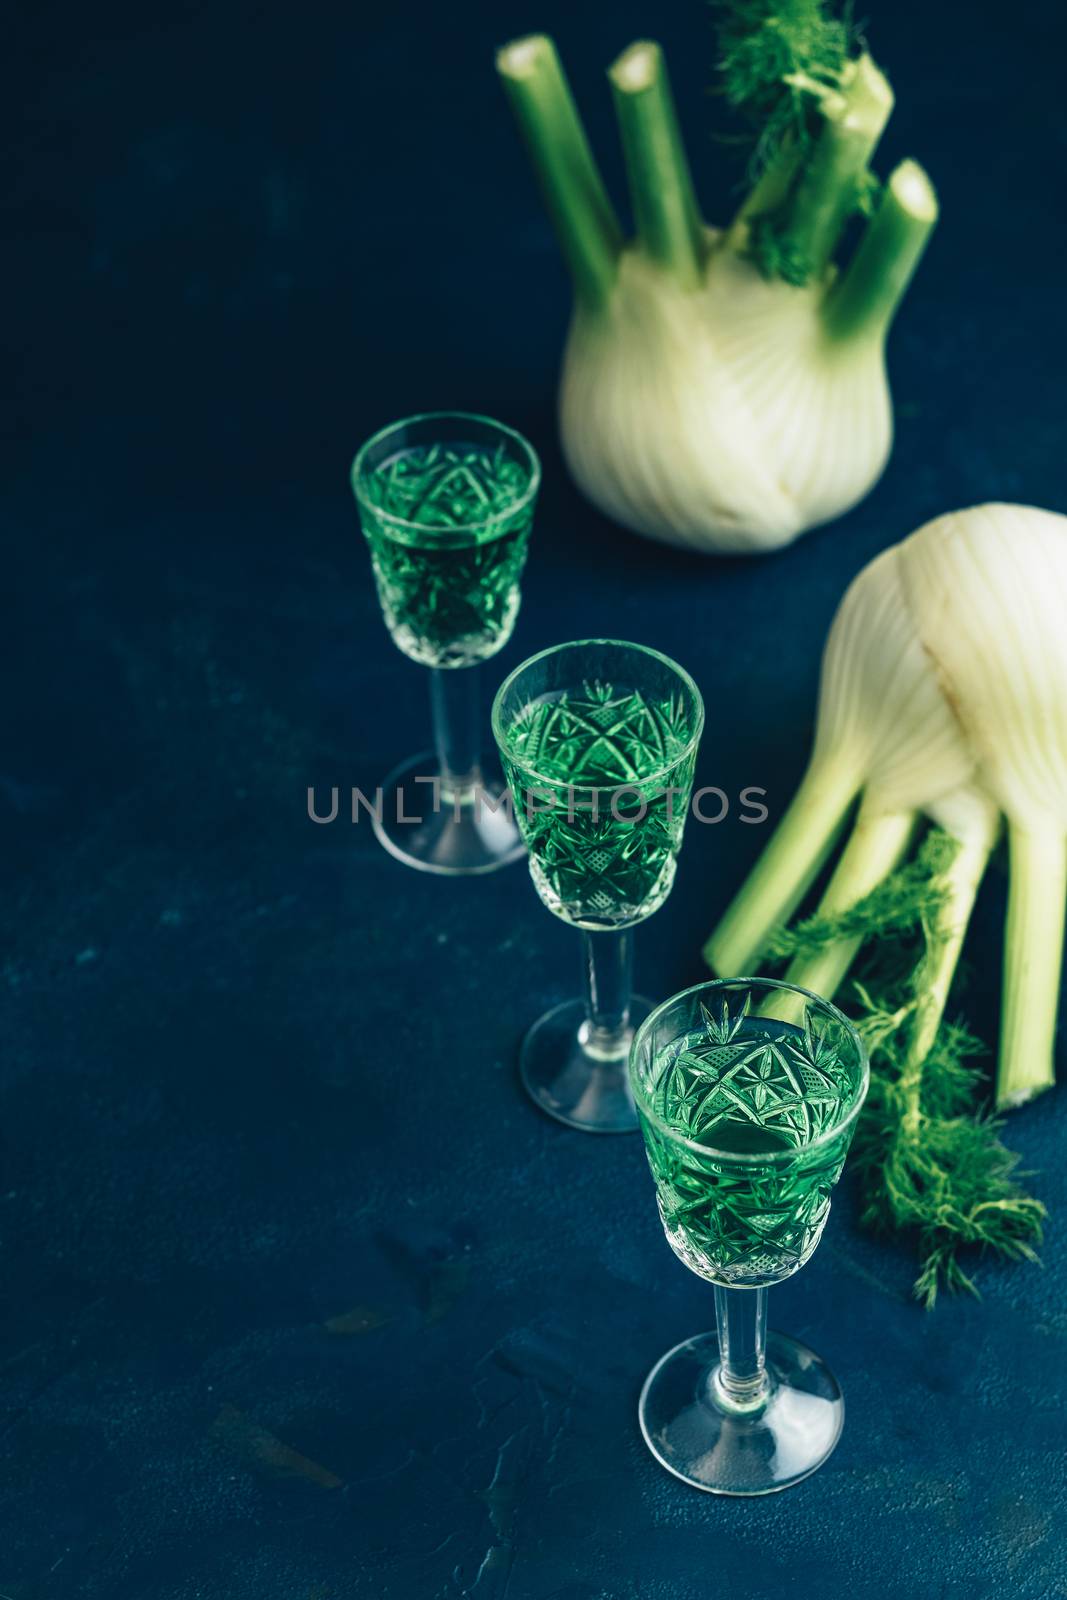 Traditional italian or czech liqueur or bitter with fennel. Three absinthe glass. Dark blue concrete table surface background, copy space for you text.